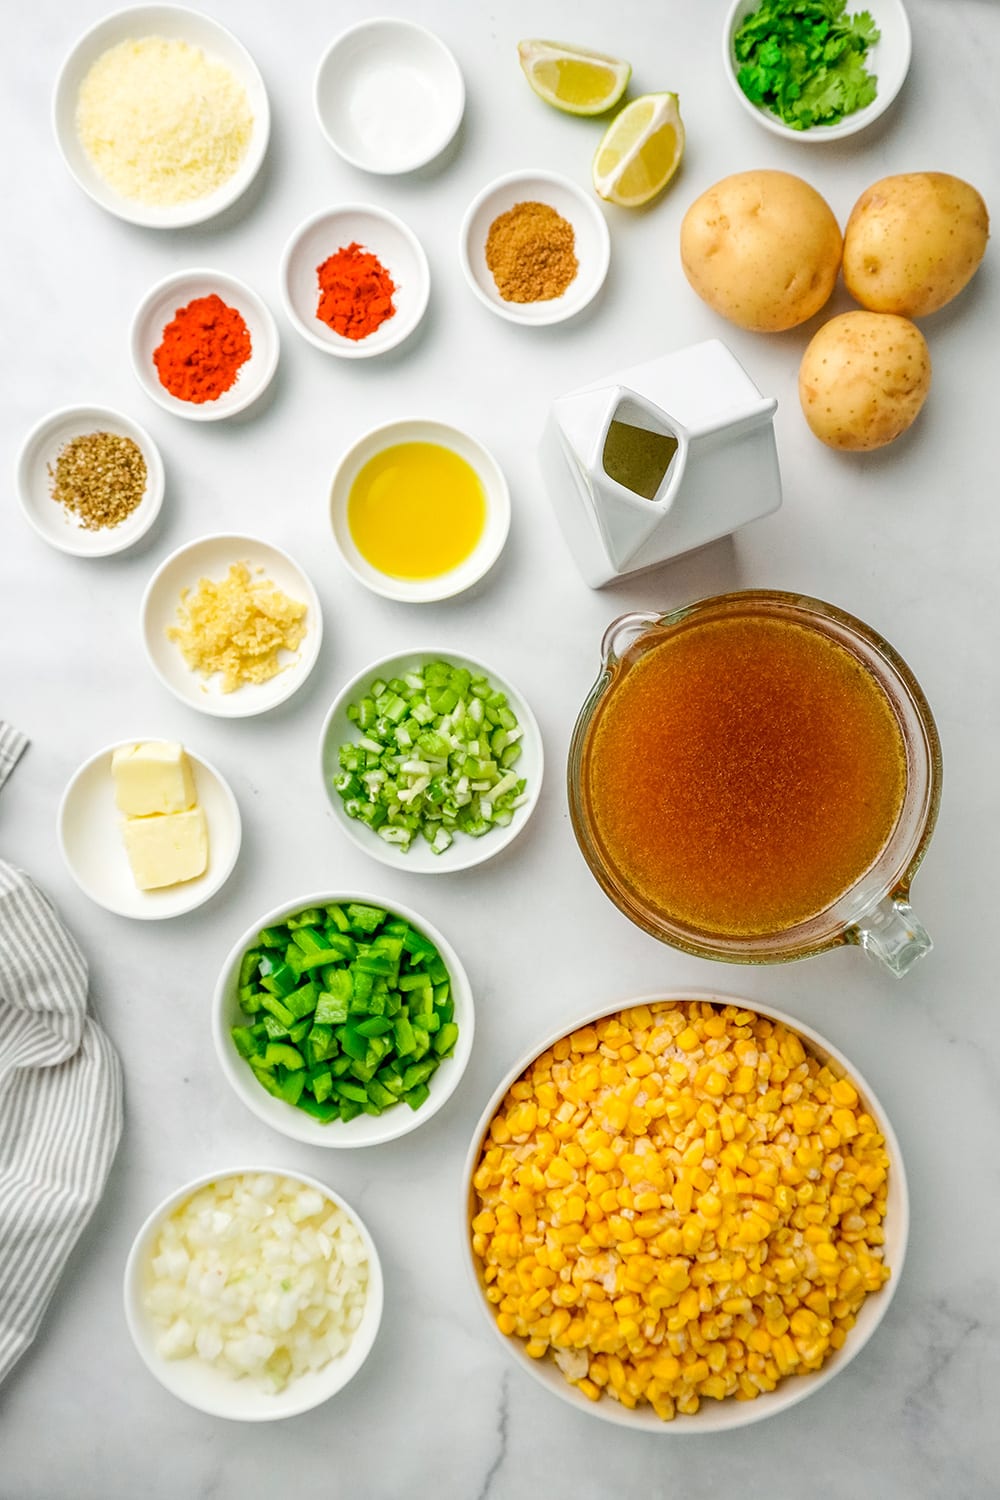 Ingredients for street corn soup